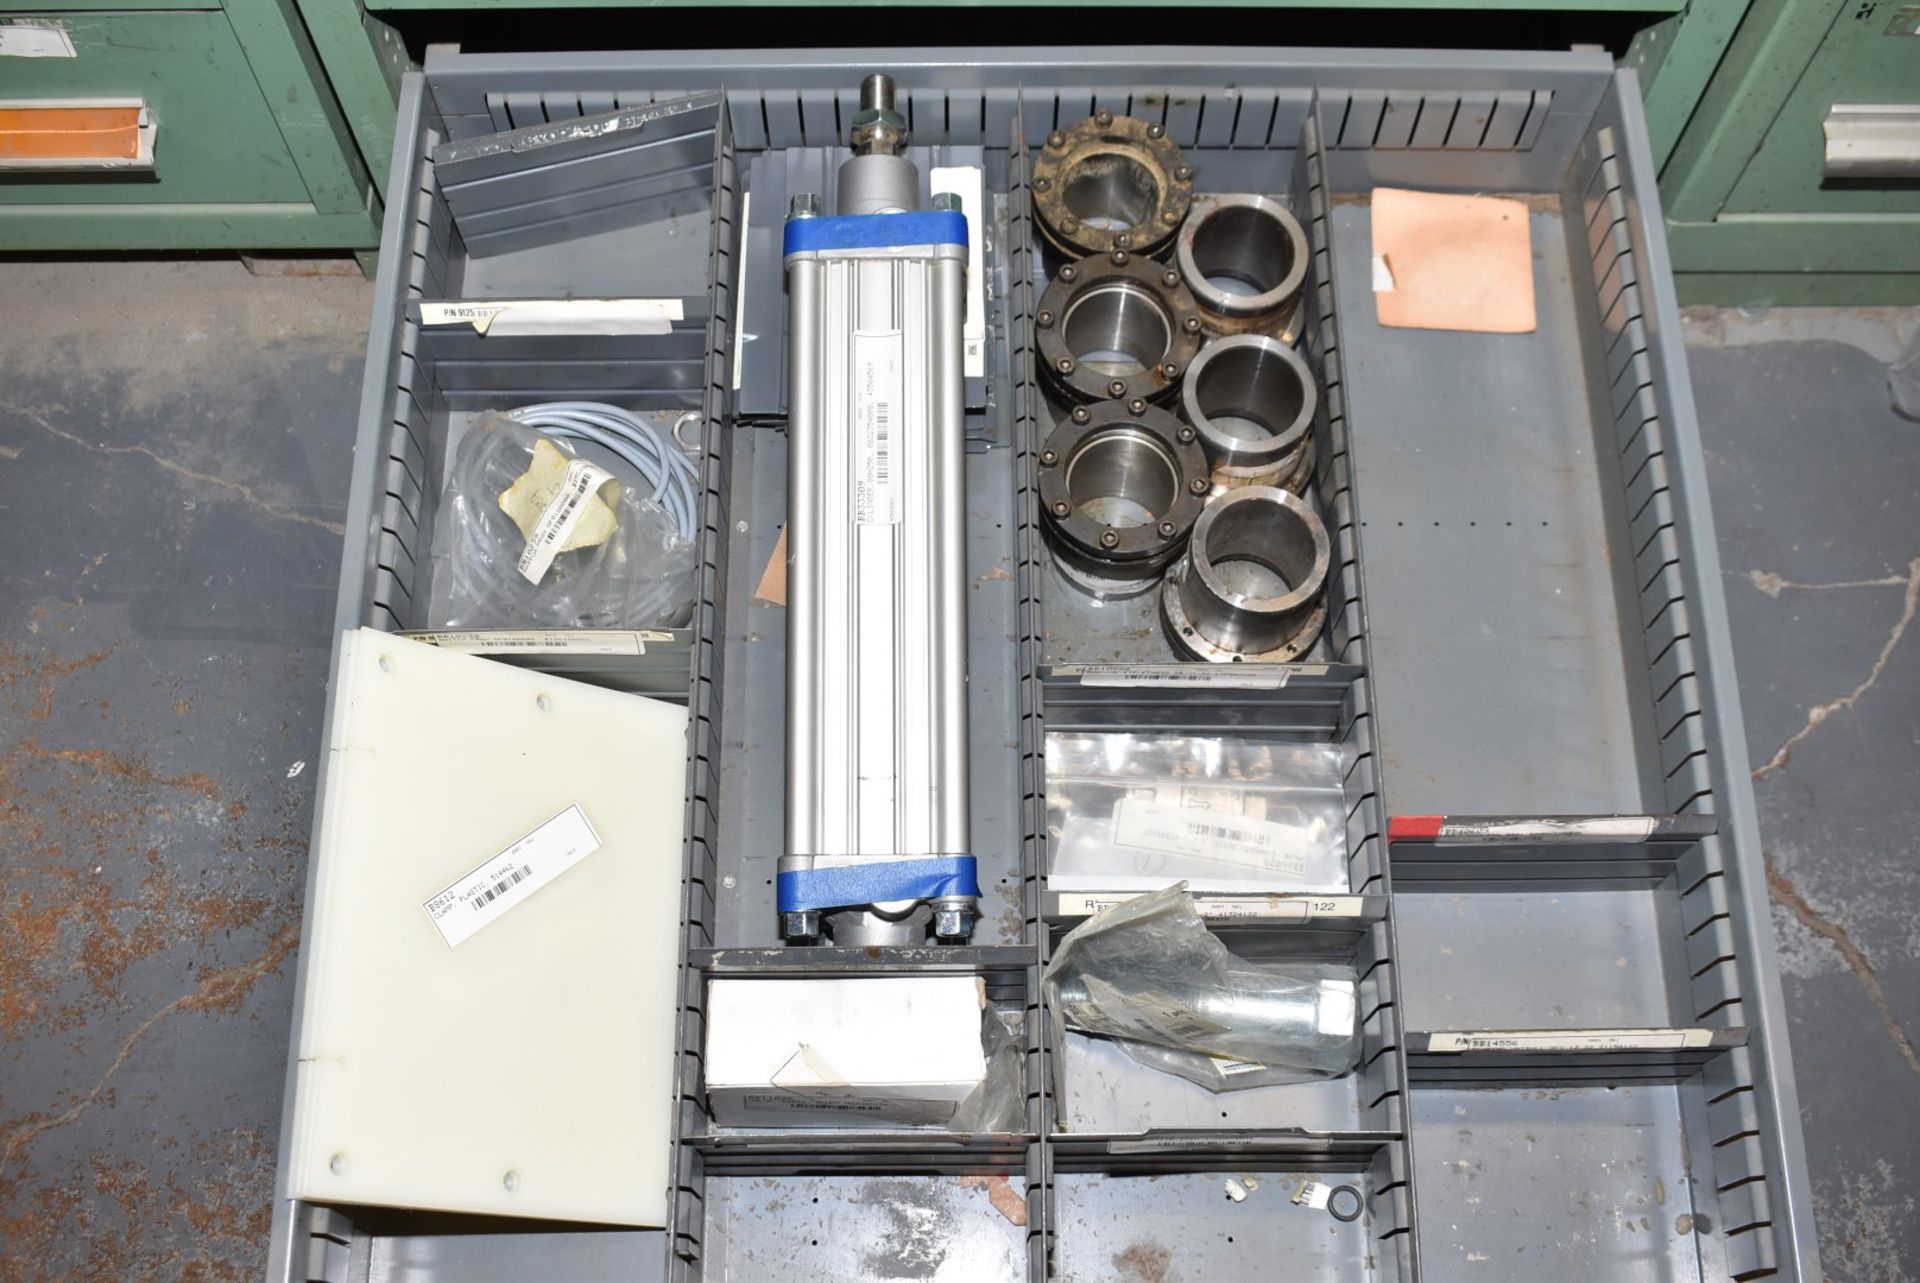 LOT/ CONTENTS OF CABINET - INCLUDING DISC LINING, O-RINGS, ELECTRICAL COMPONENTS, SPROCKETS, - Image 8 of 8